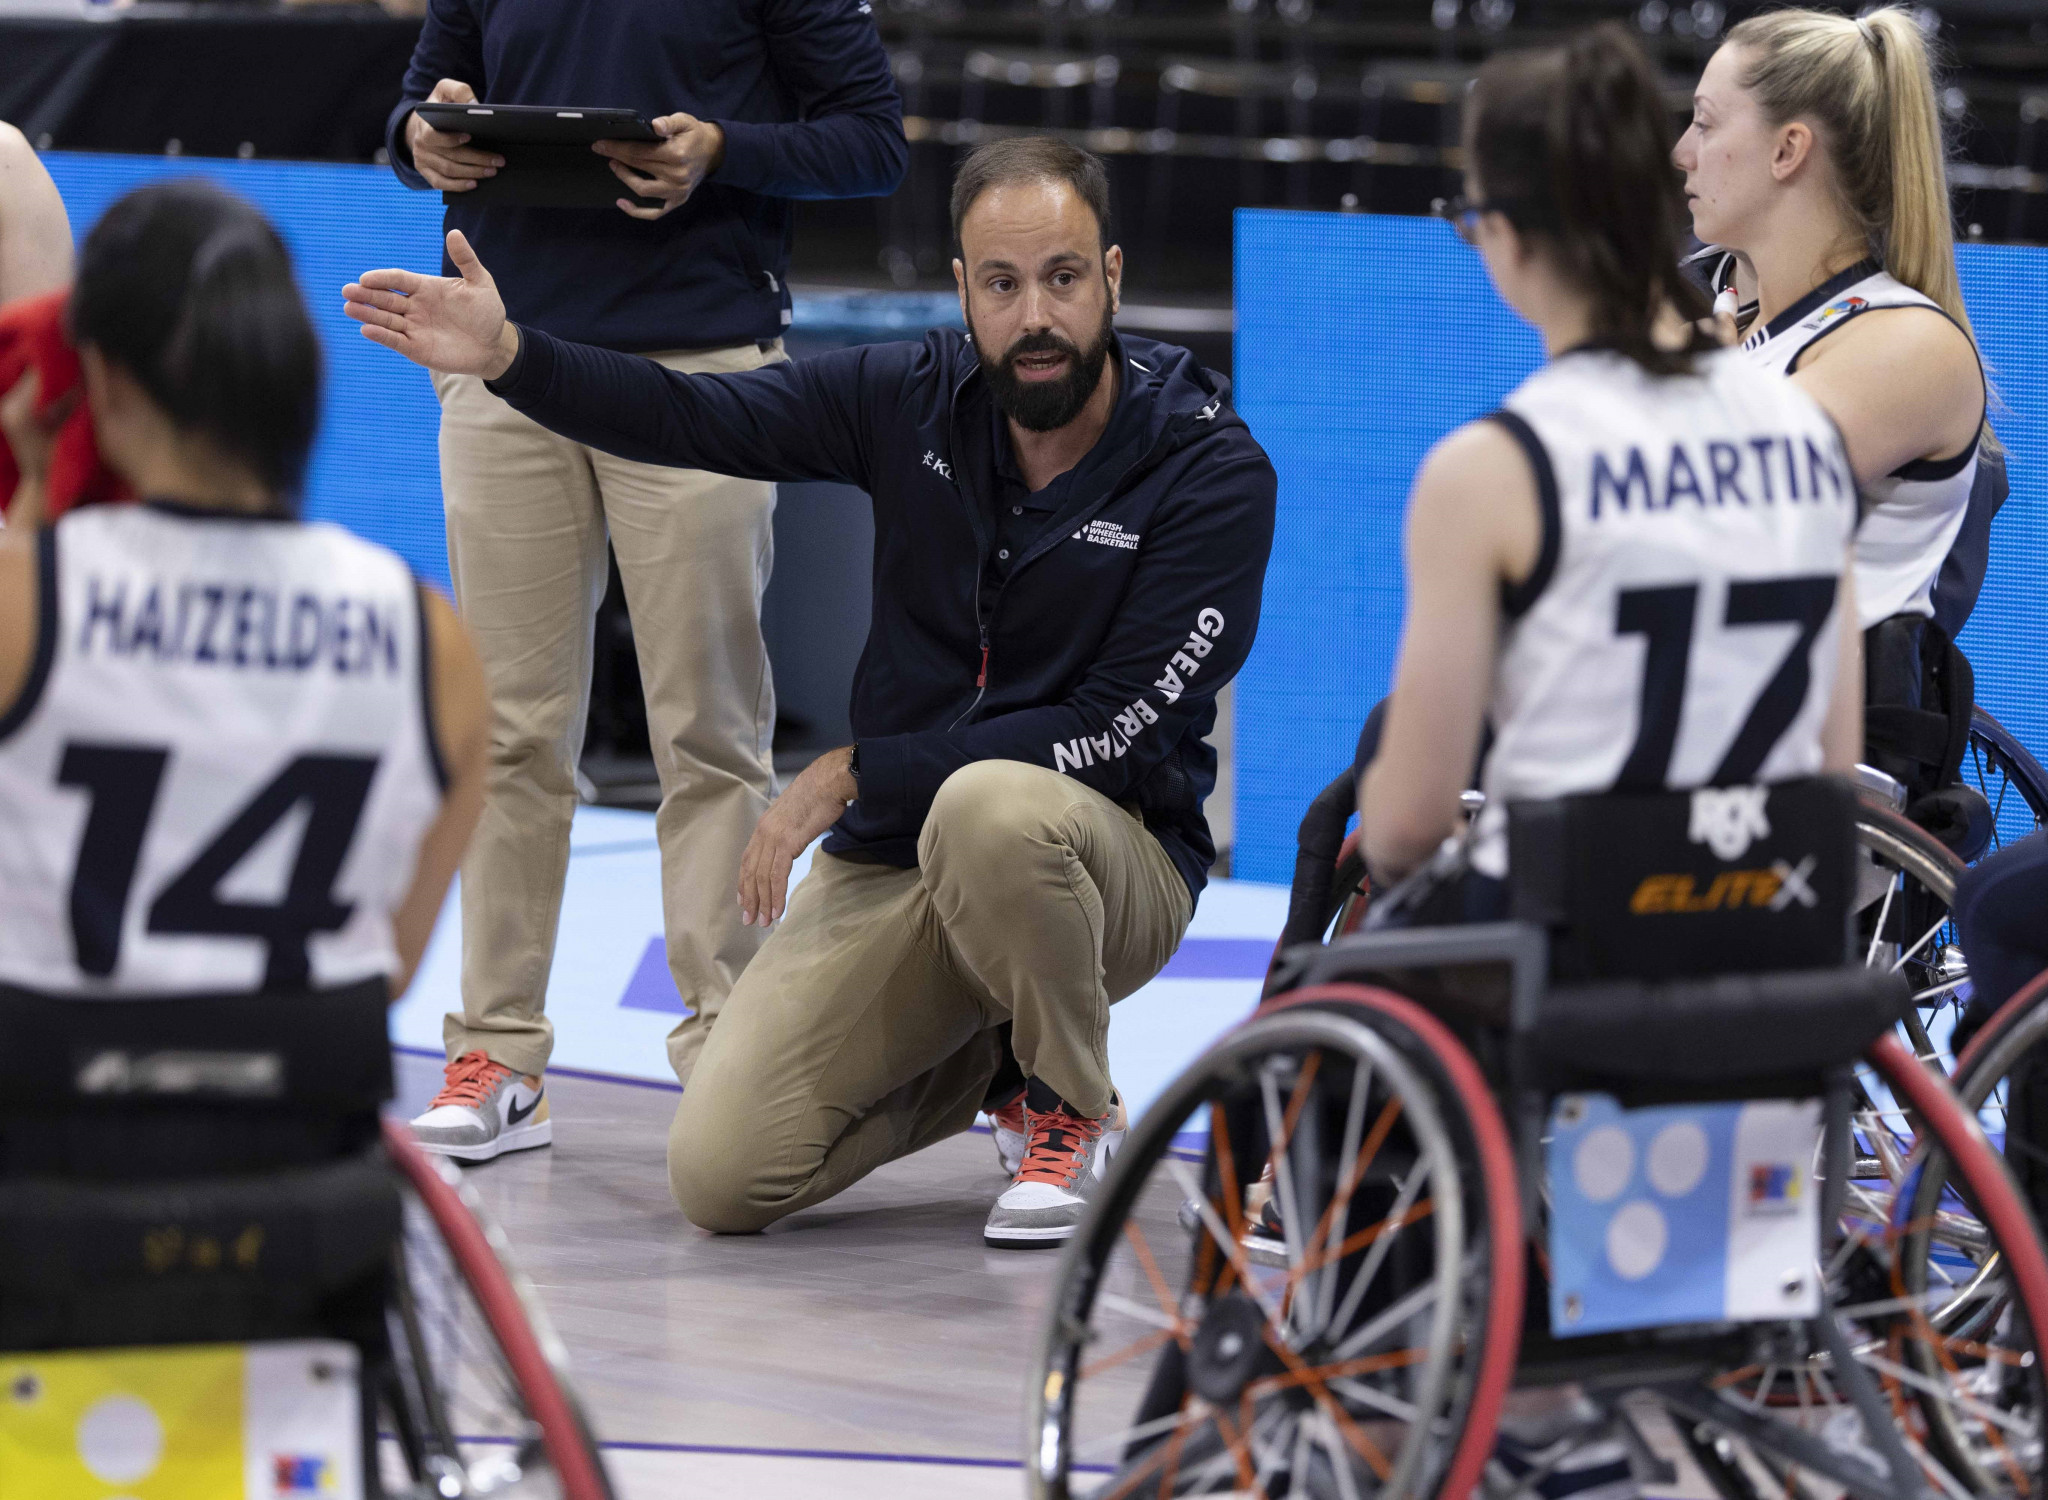 Britain's coach Miguel Vaquero Maestre passes on instructions to his players during their 48-43 defeat to Germany ©EPC